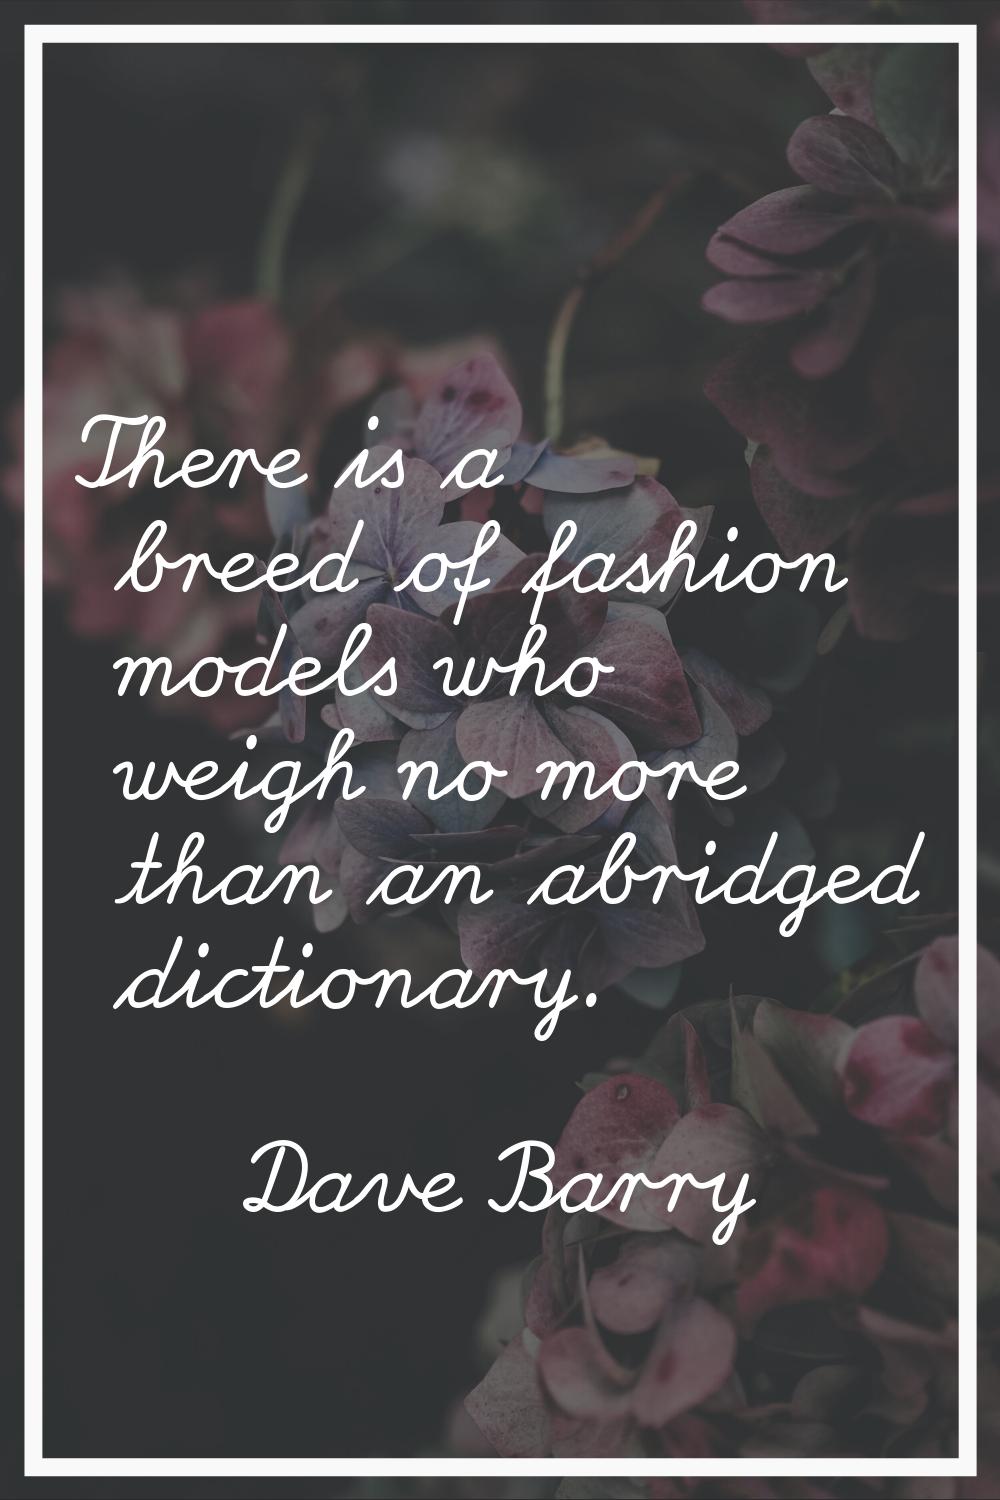 There is a breed of fashion models who weigh no more than an abridged dictionary.